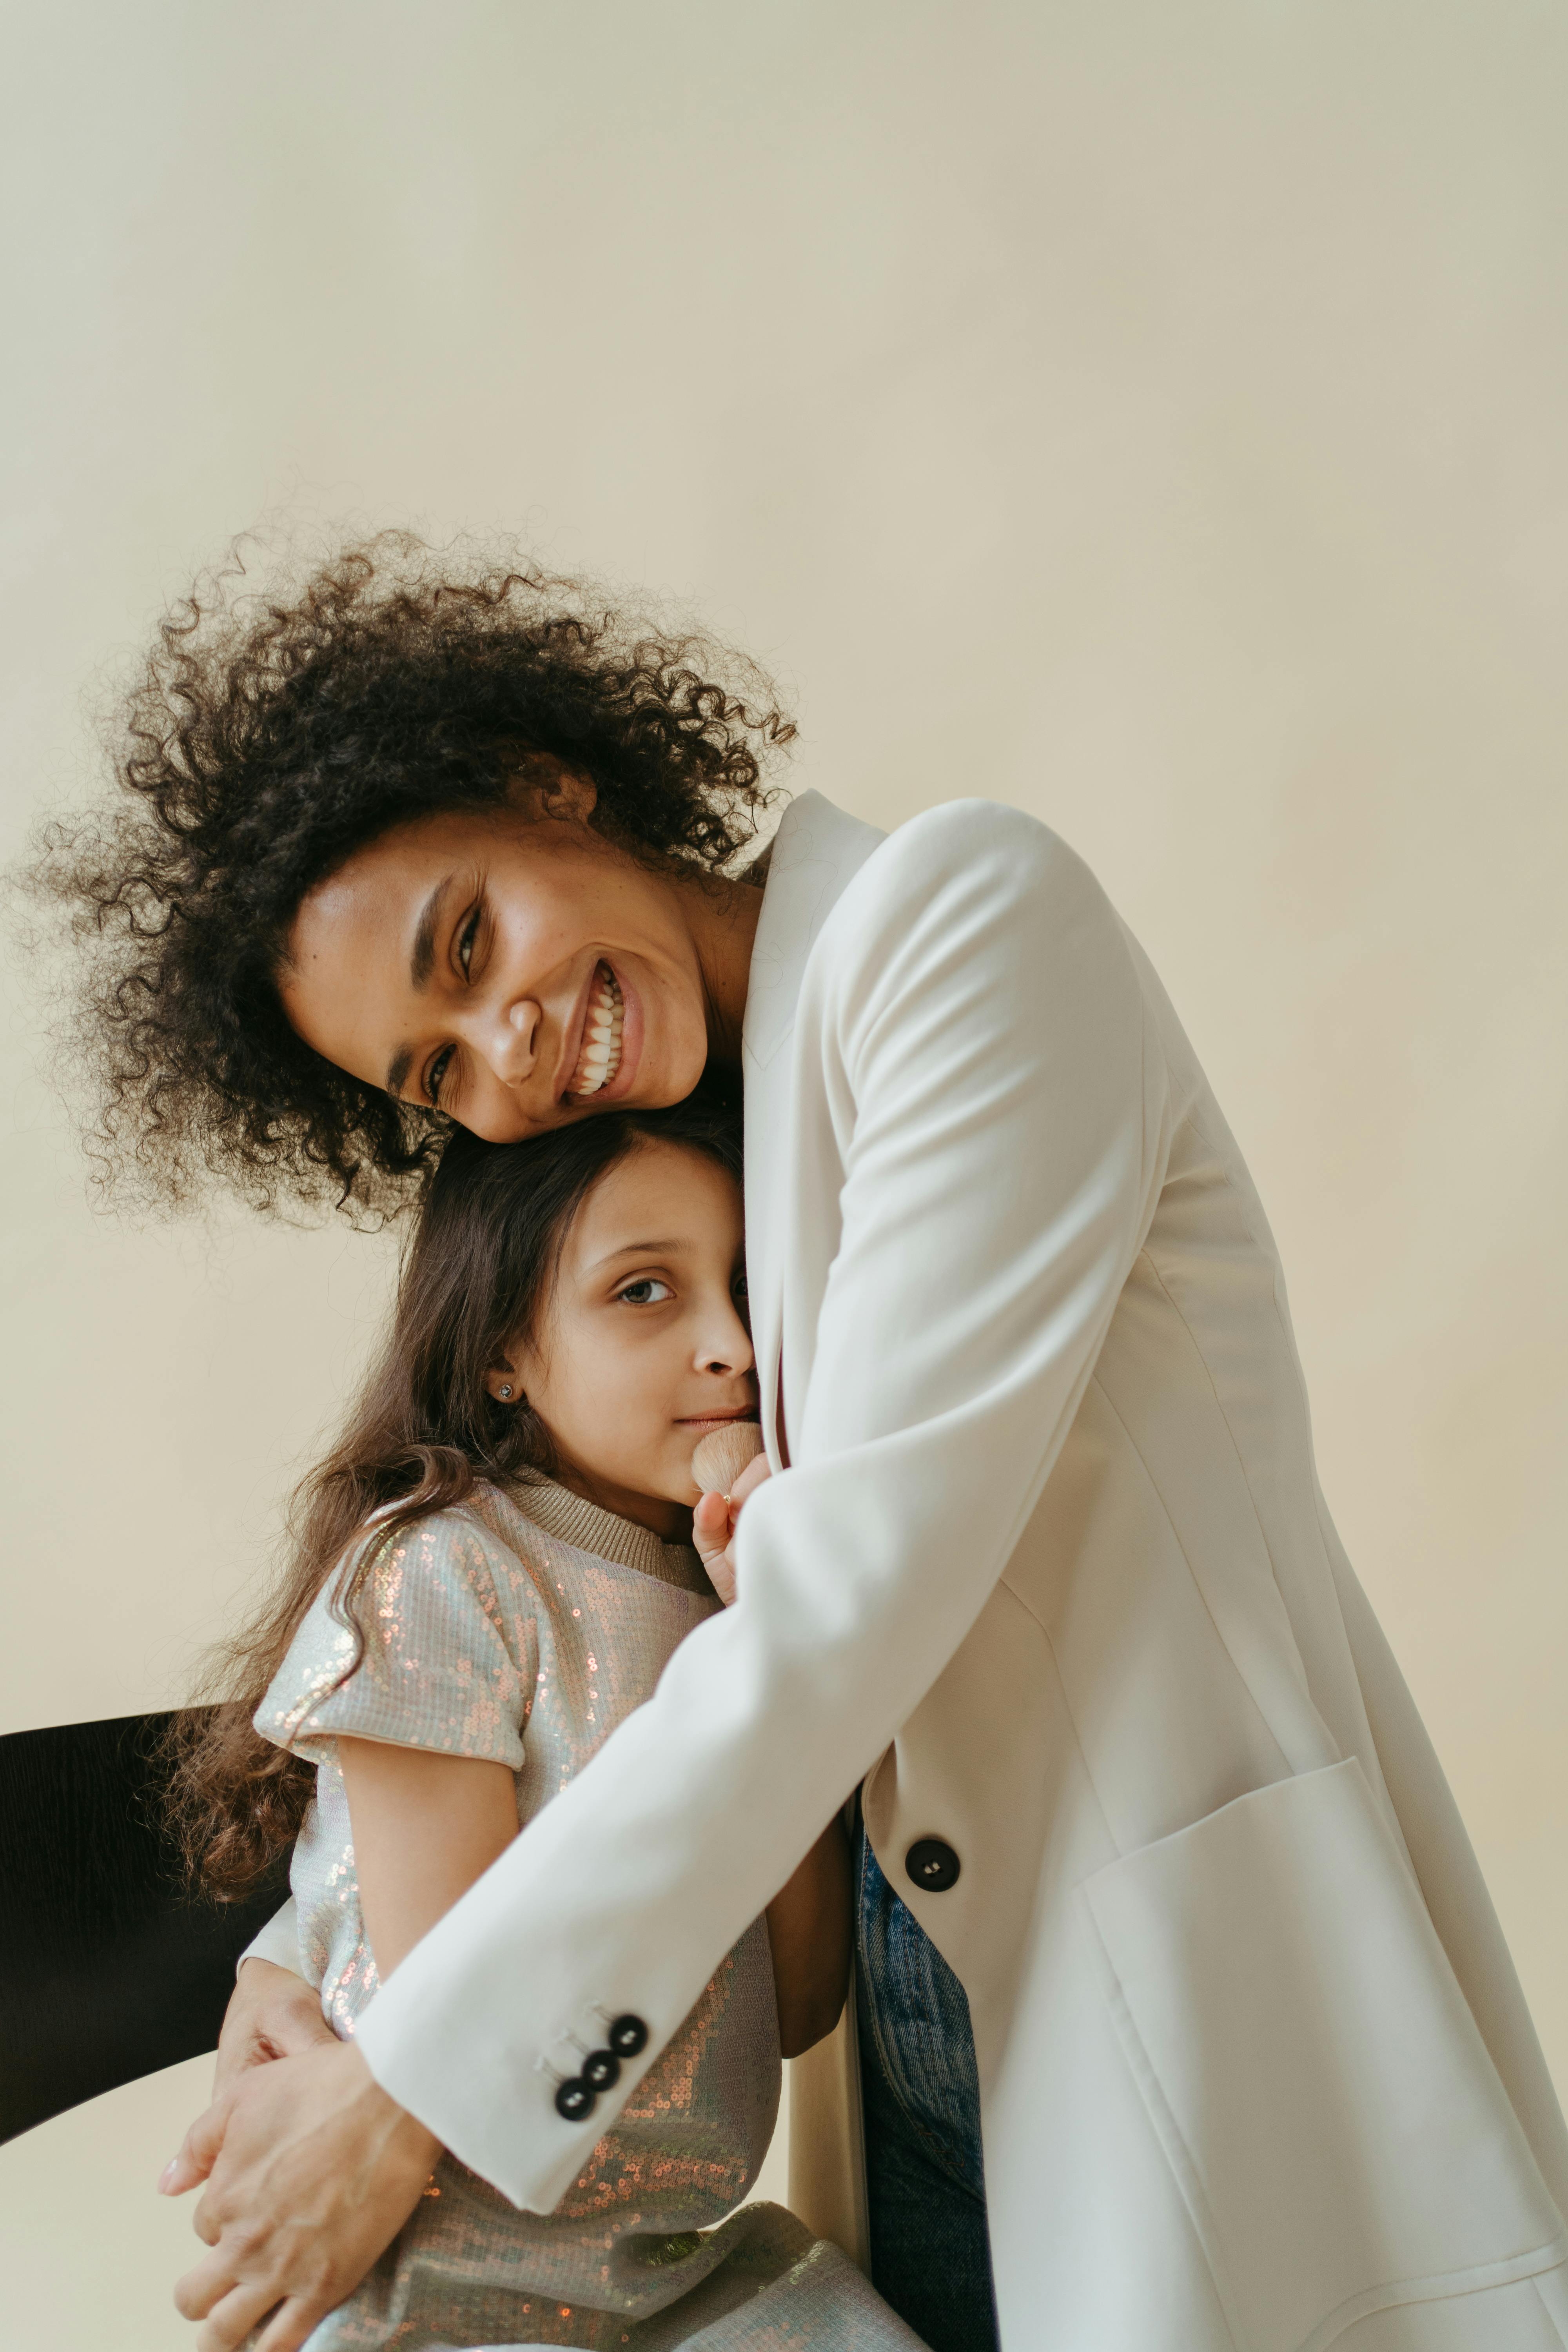 A woman embracing her daughter | Source: Pexels